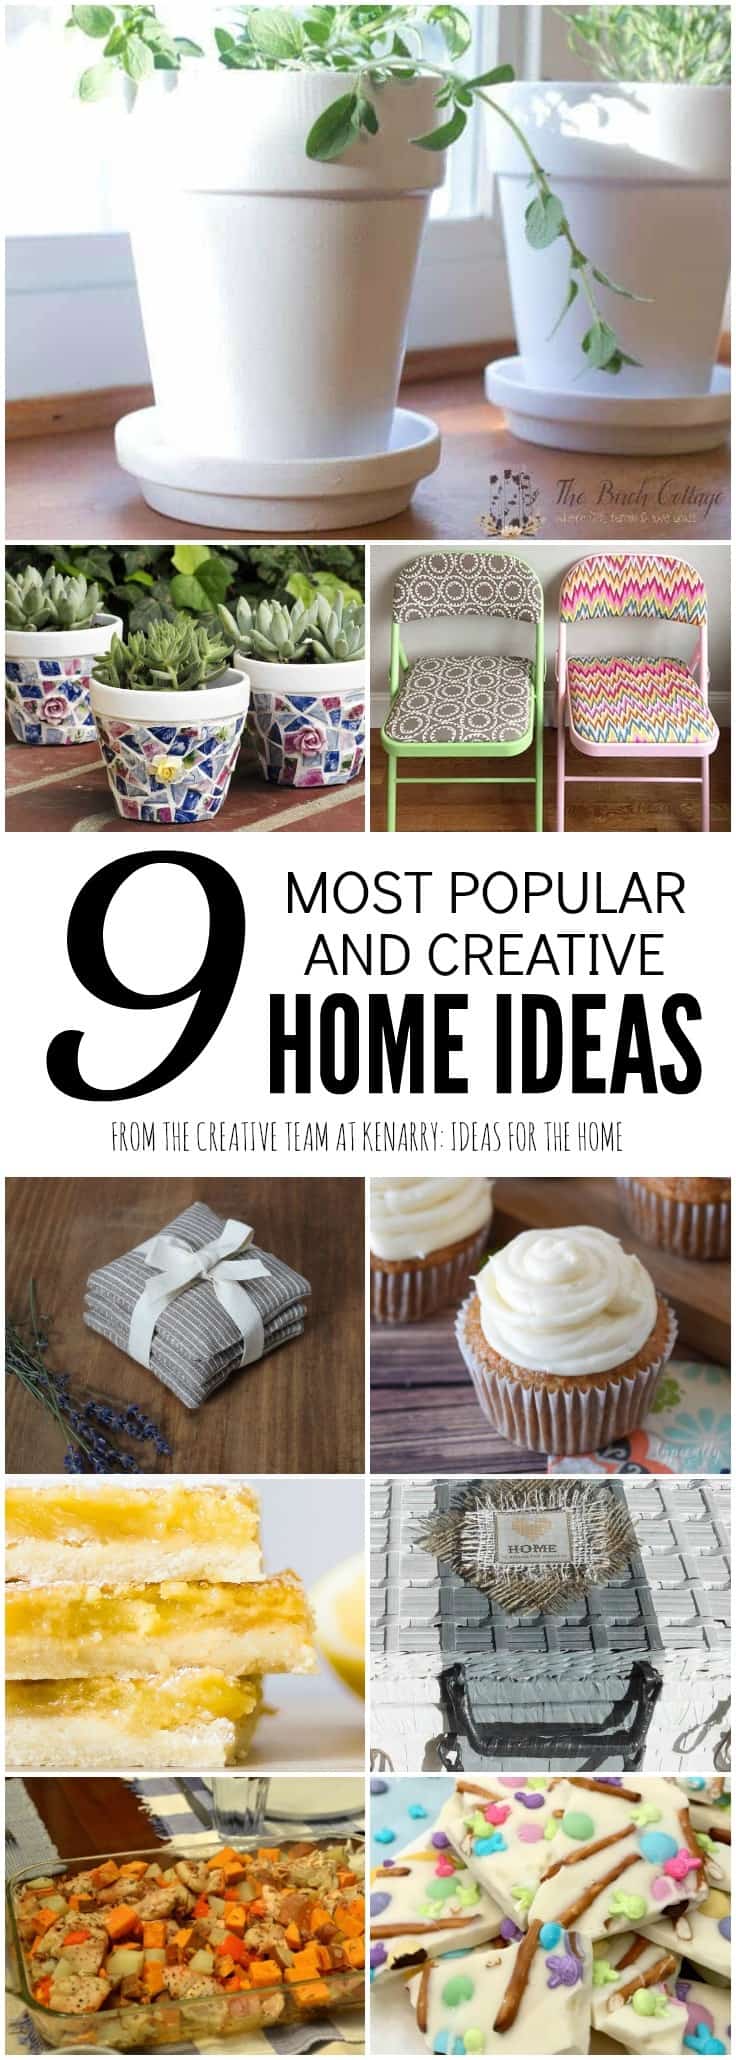 Check out the 9 most popular home ideas from the Kenarry Creative Team including the best recipes, crafts, DIY projects, decor and more.